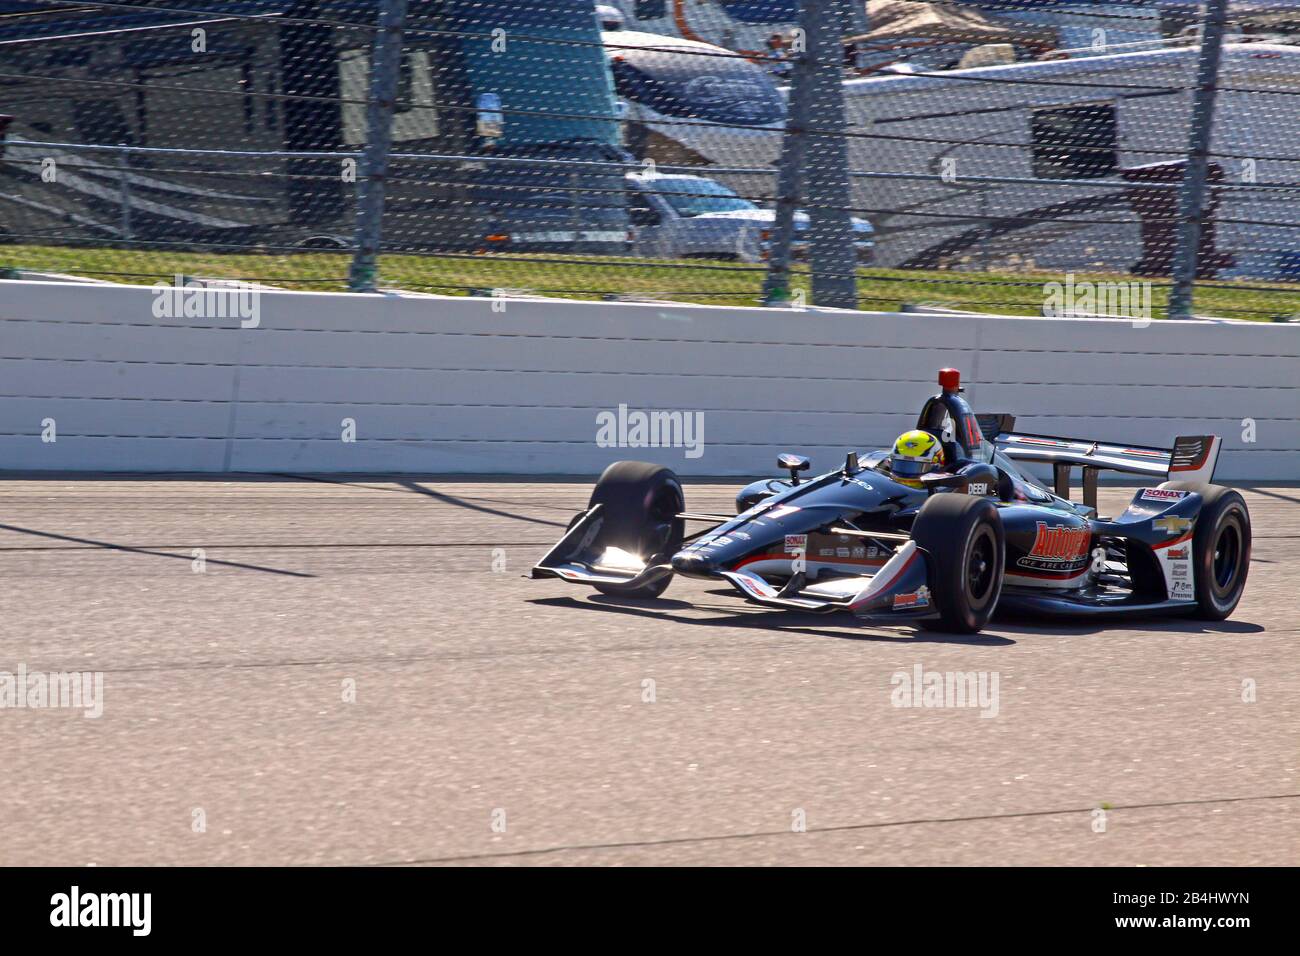 Newton Iowa, July 19, 2019: (Driver) on race track during practice session for the Iowa 300 Indycar race. Stock Photo